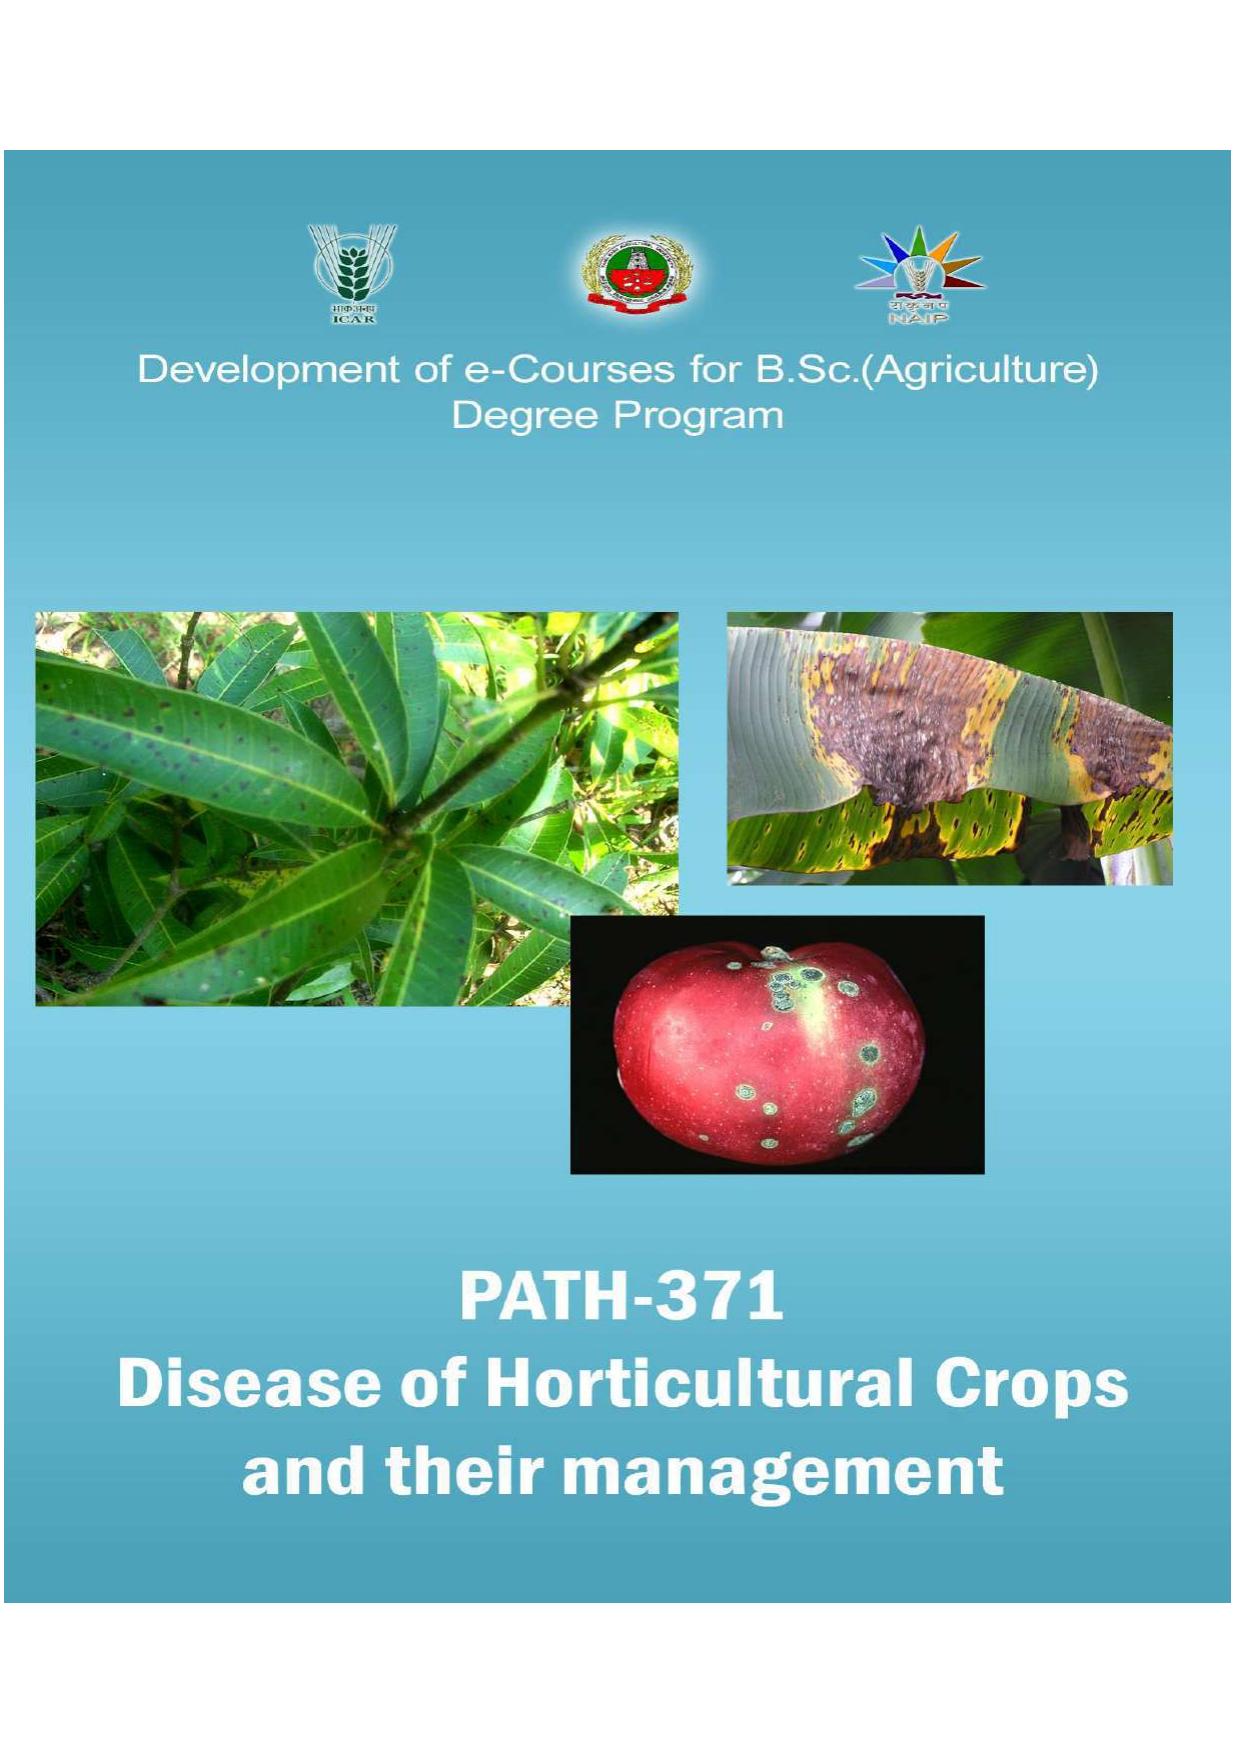 DISEASES OF HORTICULTURAL CROPS AND THEIR MANAGEMENT 2016